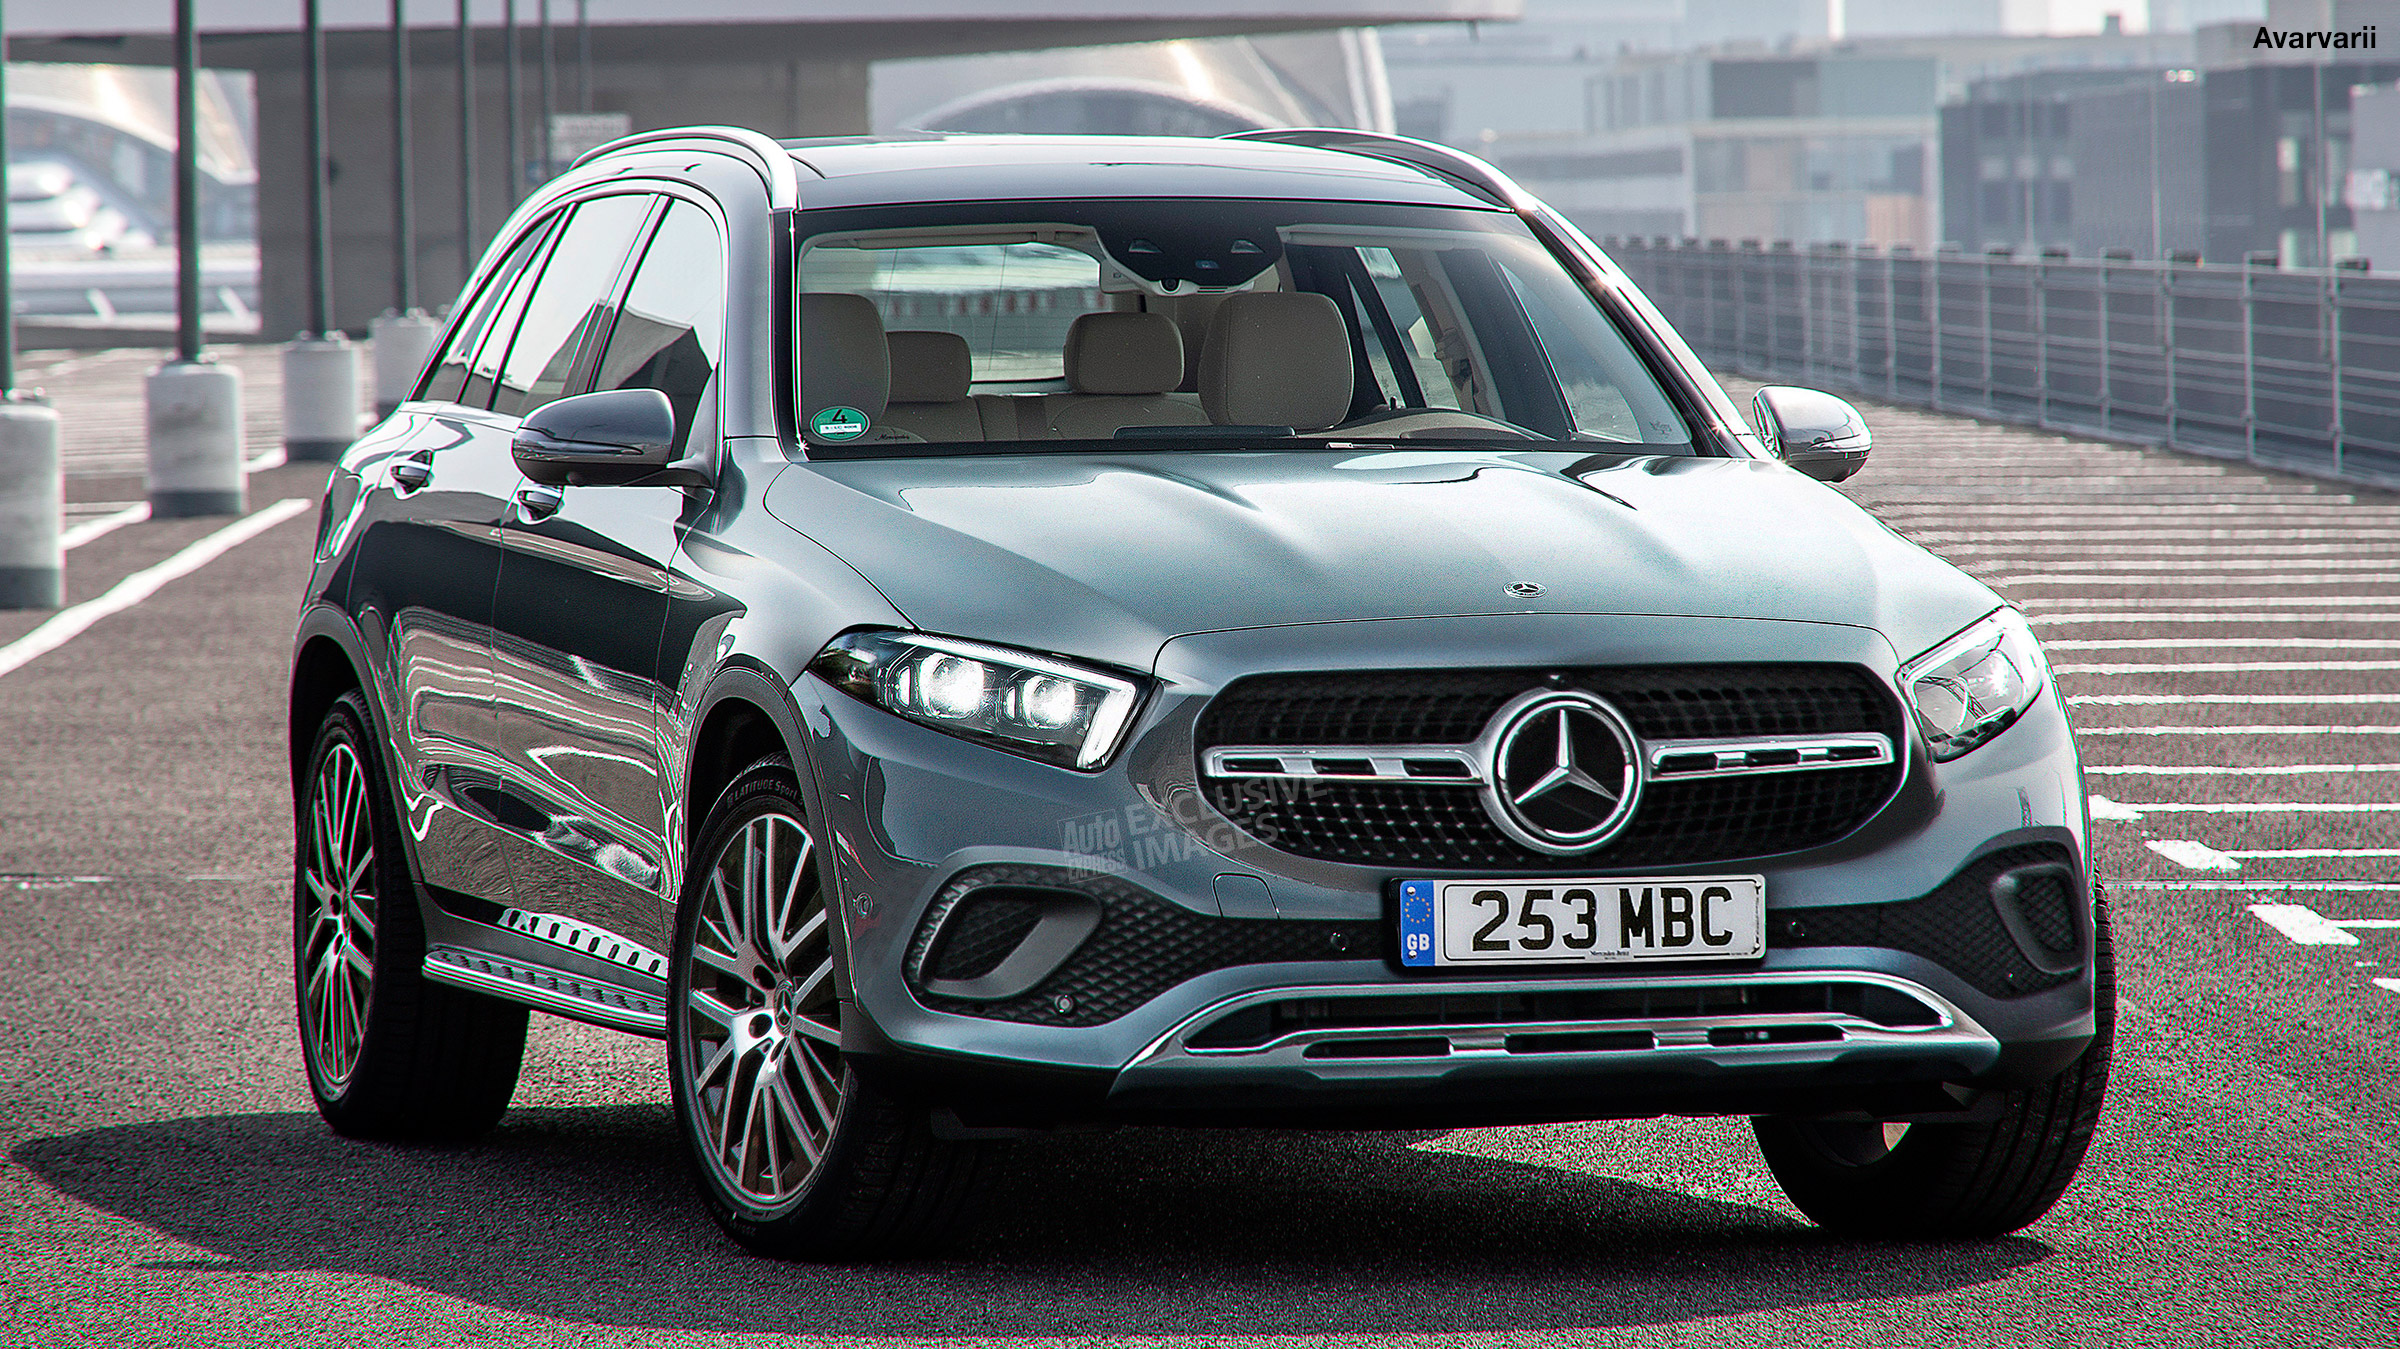 New 2022 Mercedes GLC to rival Audi Q5 and BMW X3 with 